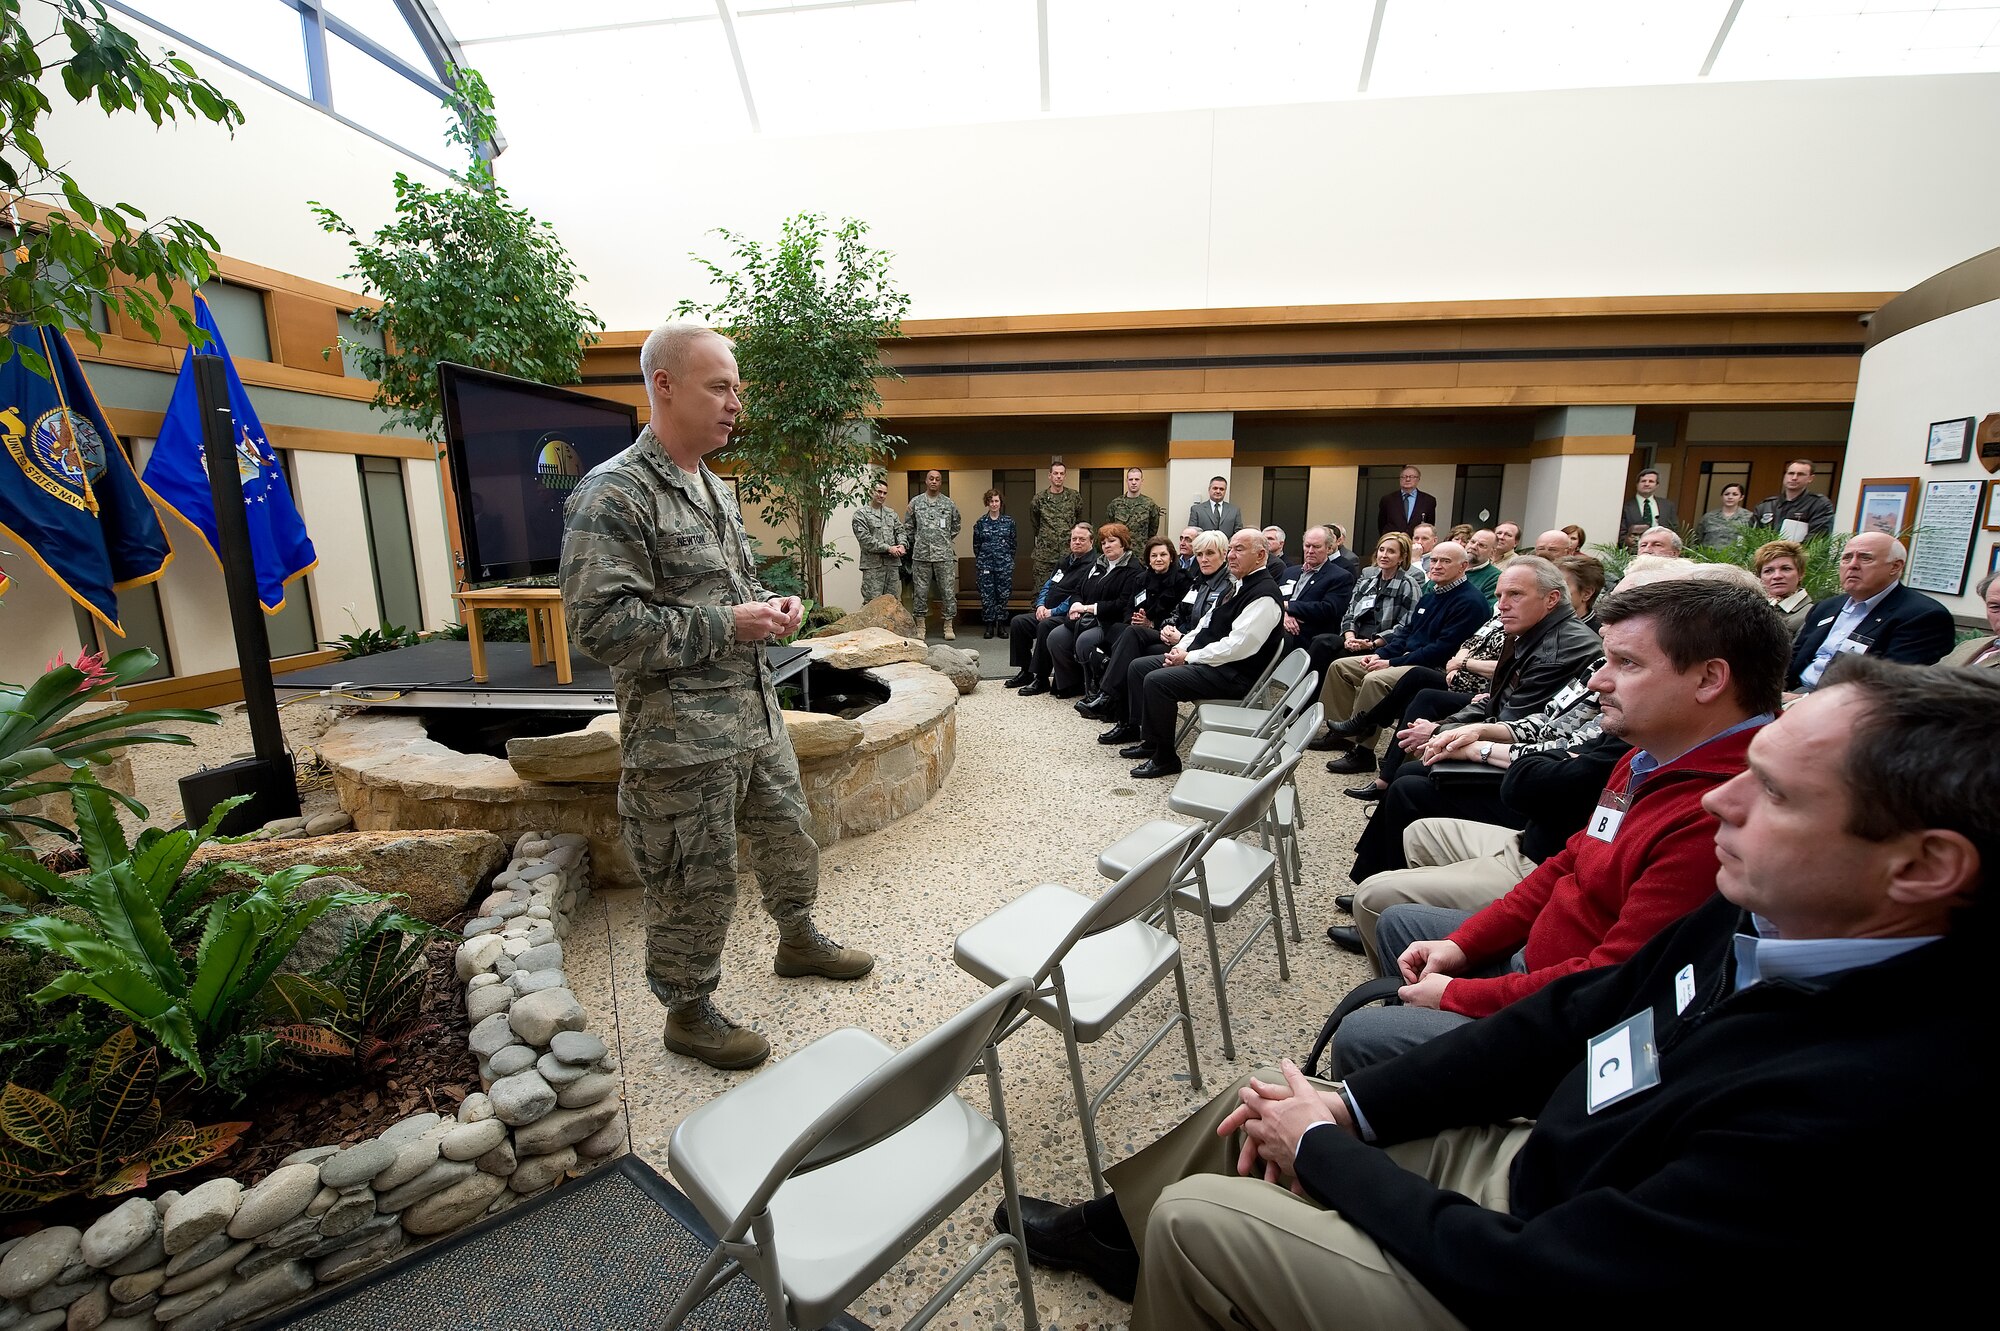 Lt. Gen. Richard Y. Newton III, Air Staff, Headquarters U.S. Air Force, Washington, D.C., assistant vice chief of staff and director, led 41 civic leaders during a tour of the Air Force Mortuary Affairs Operations facility. (U.S. Air Force photo/Jascon Minto)